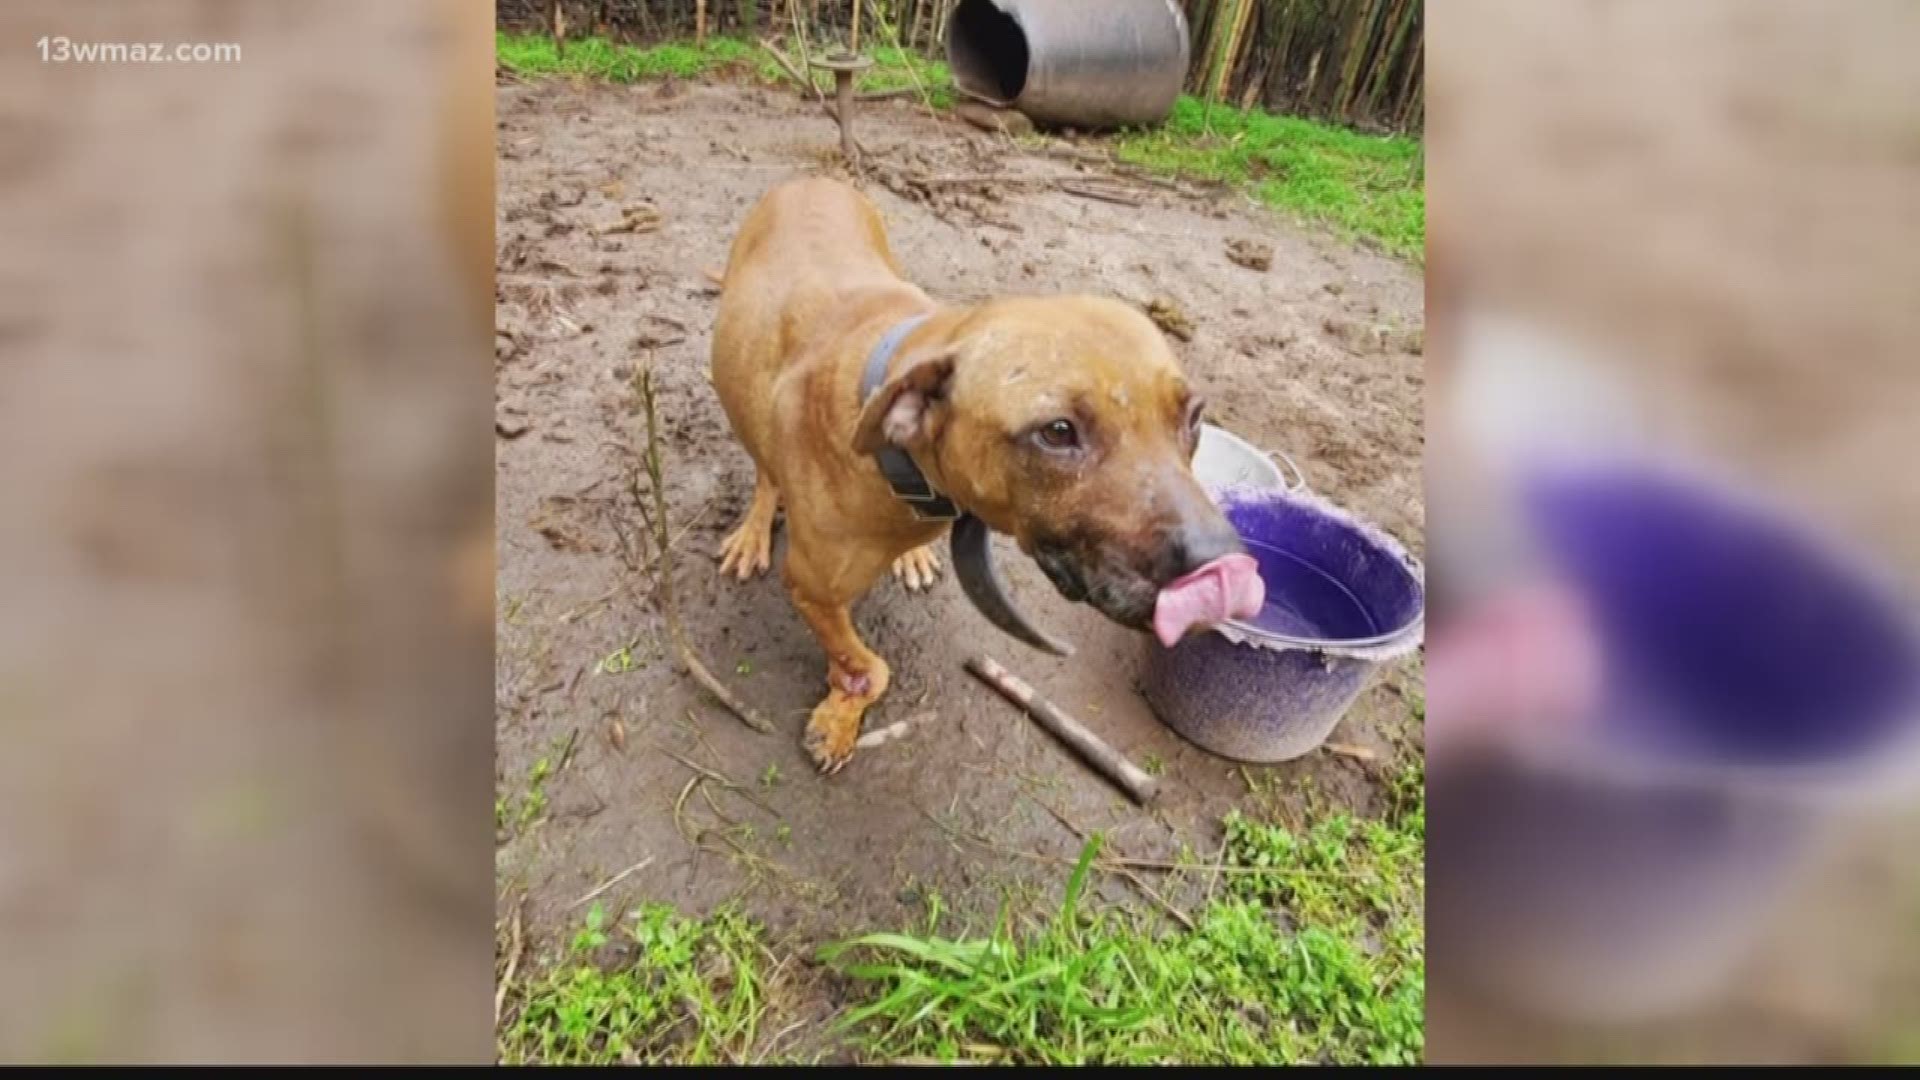 The U.S. Attorney's office Thursday announced that over 160 dogs were rescued in a dog-fighting ring, including some from Central Georgia counties